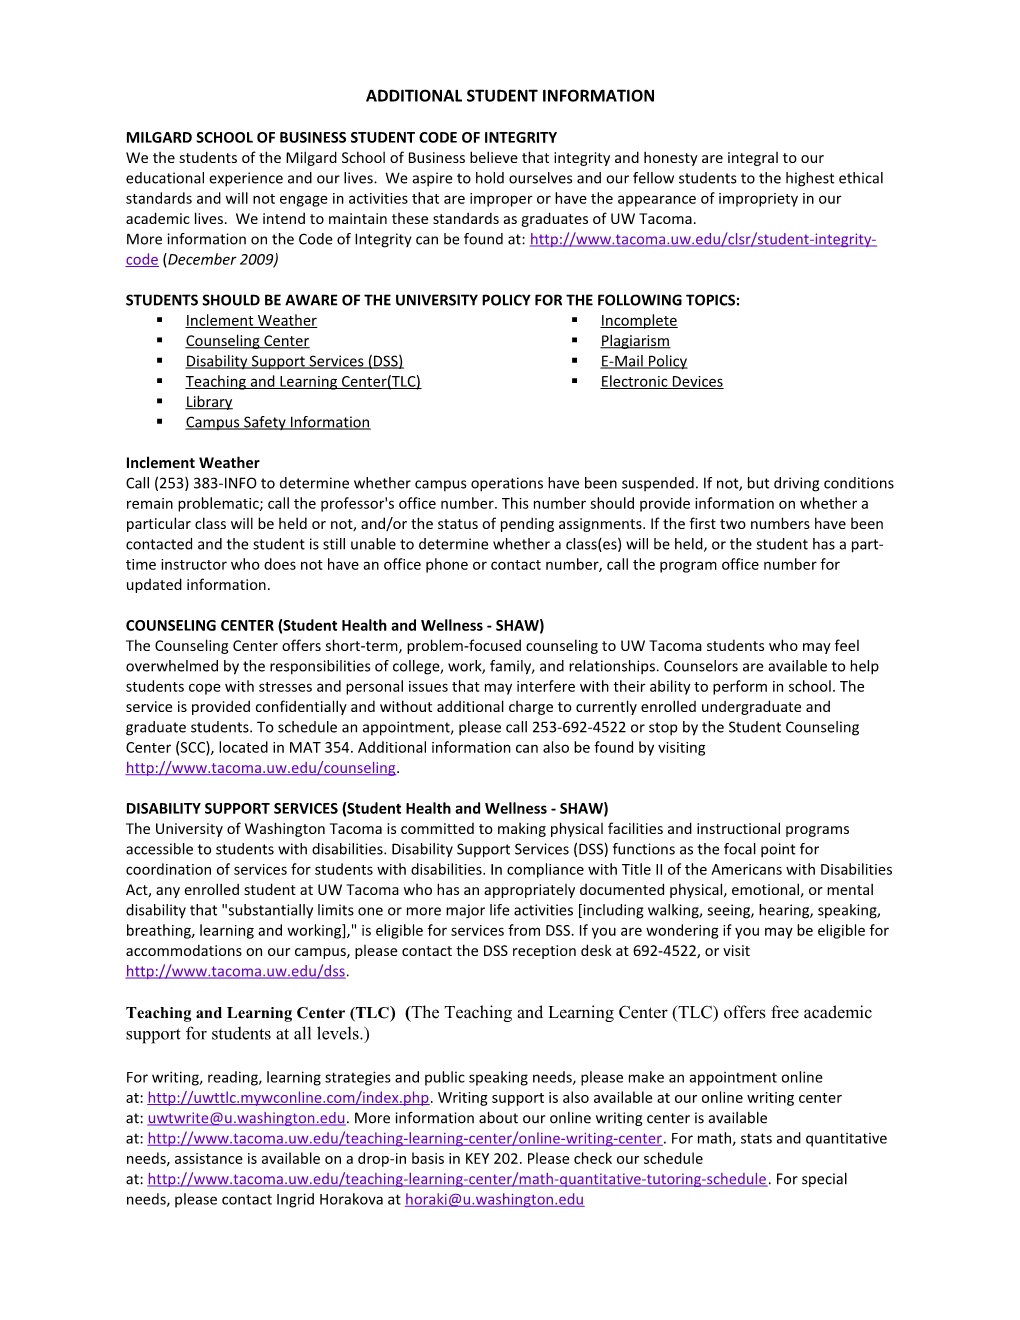 Milgard School of Business Student Code of Integrity (Required)